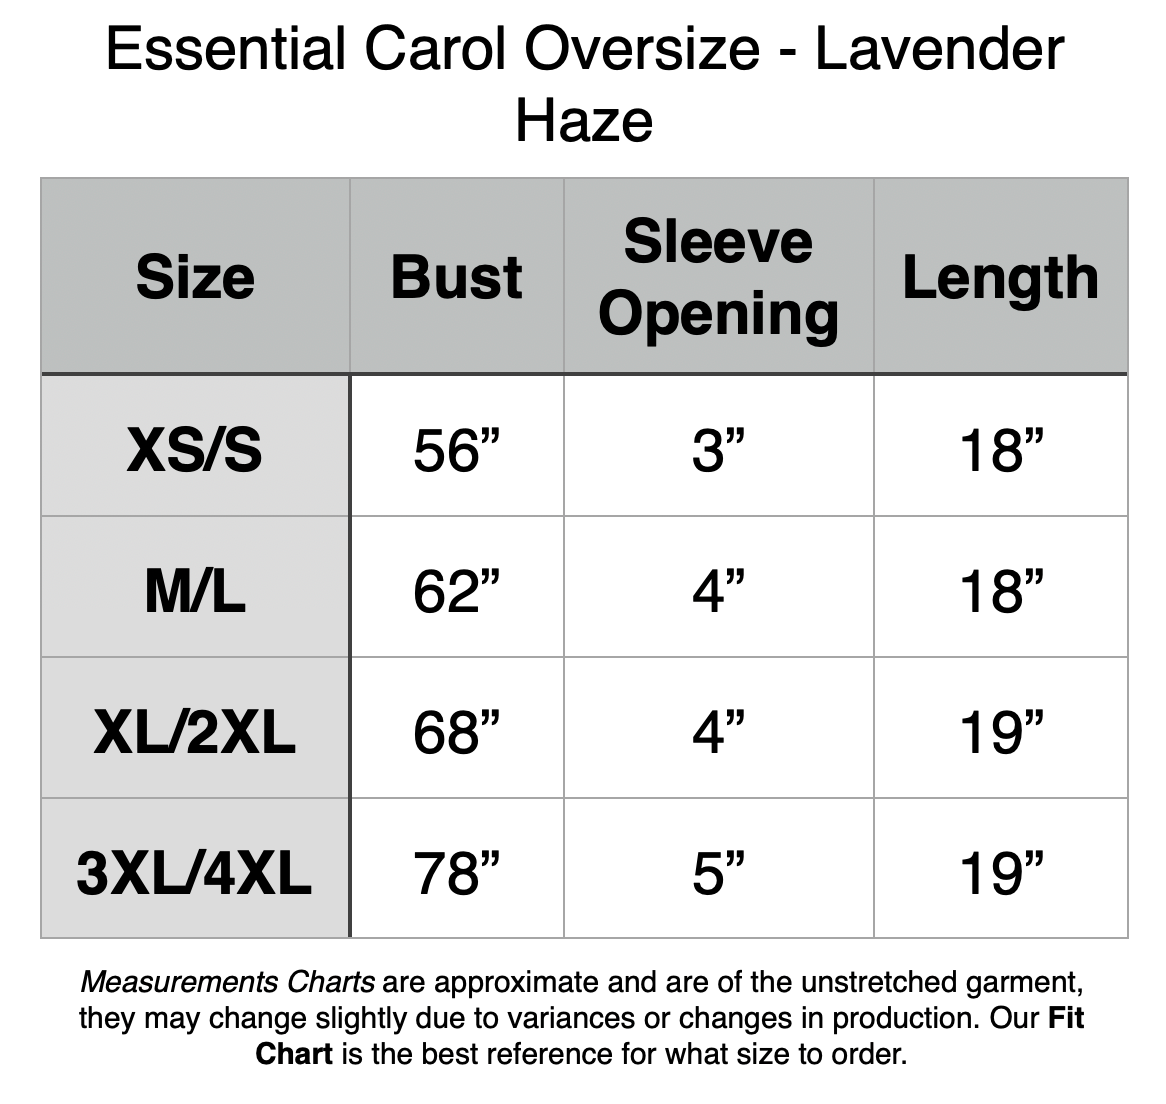 Essential Carol Oversize Crop: XS/S - 56” Bust, 3” Sleeve Opening, 18”Length. M/L - 62” Bust, 4” Sleeve Opening, 18”Length. XL/2XL - 68” Bust, 4” Sleeve Opening, 19”Length. 3XL/4XL - 78” Bust, 5” Sleeve Opening, 19”Length.